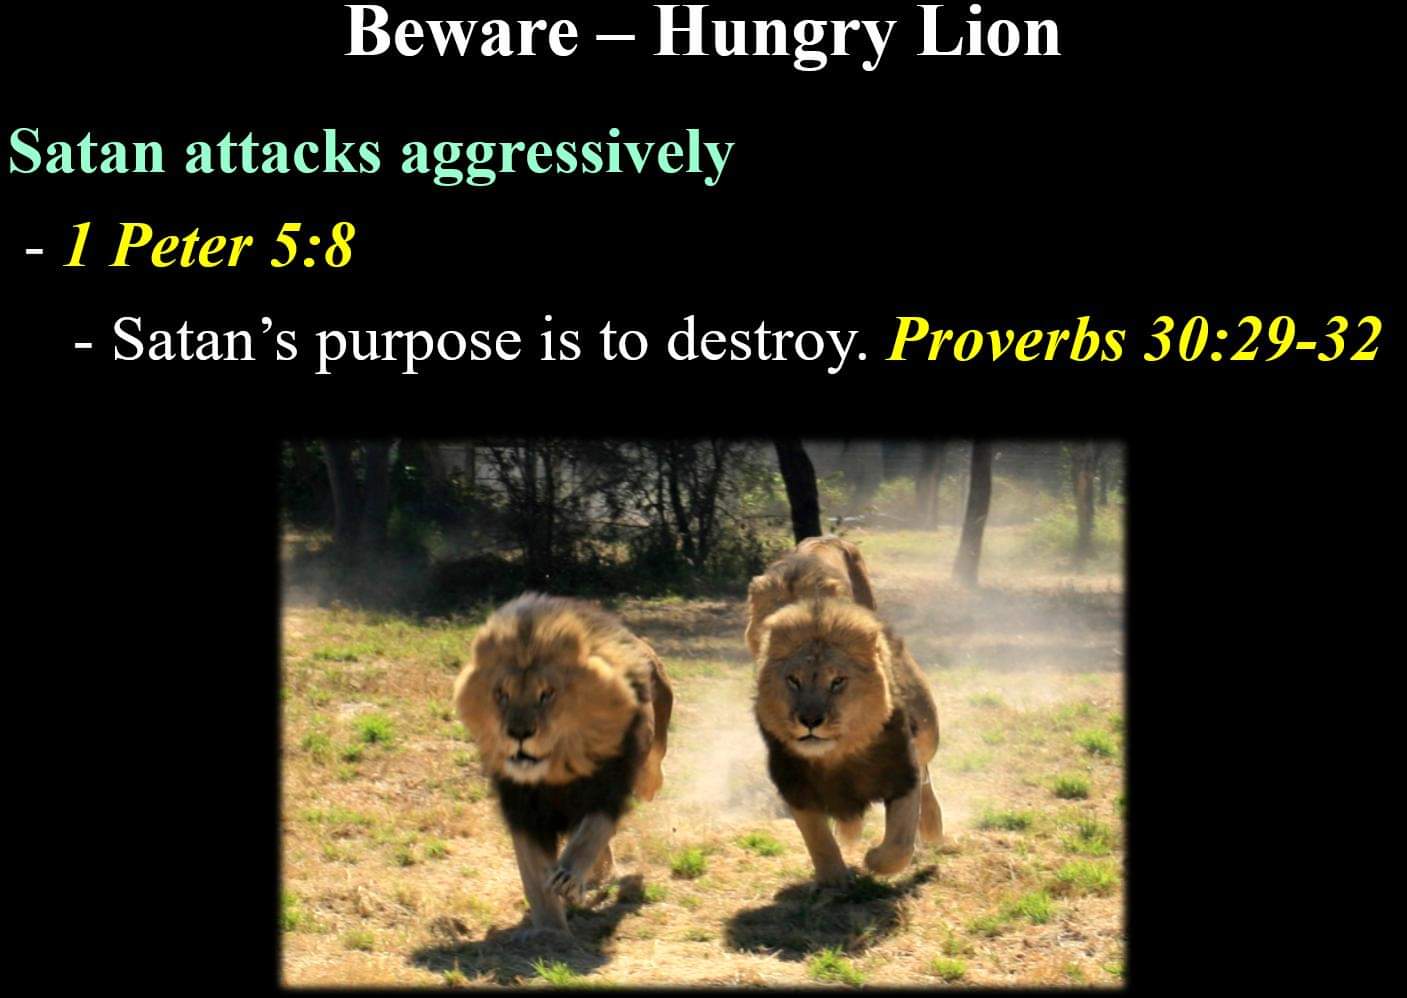 Beware, Hungry Lion